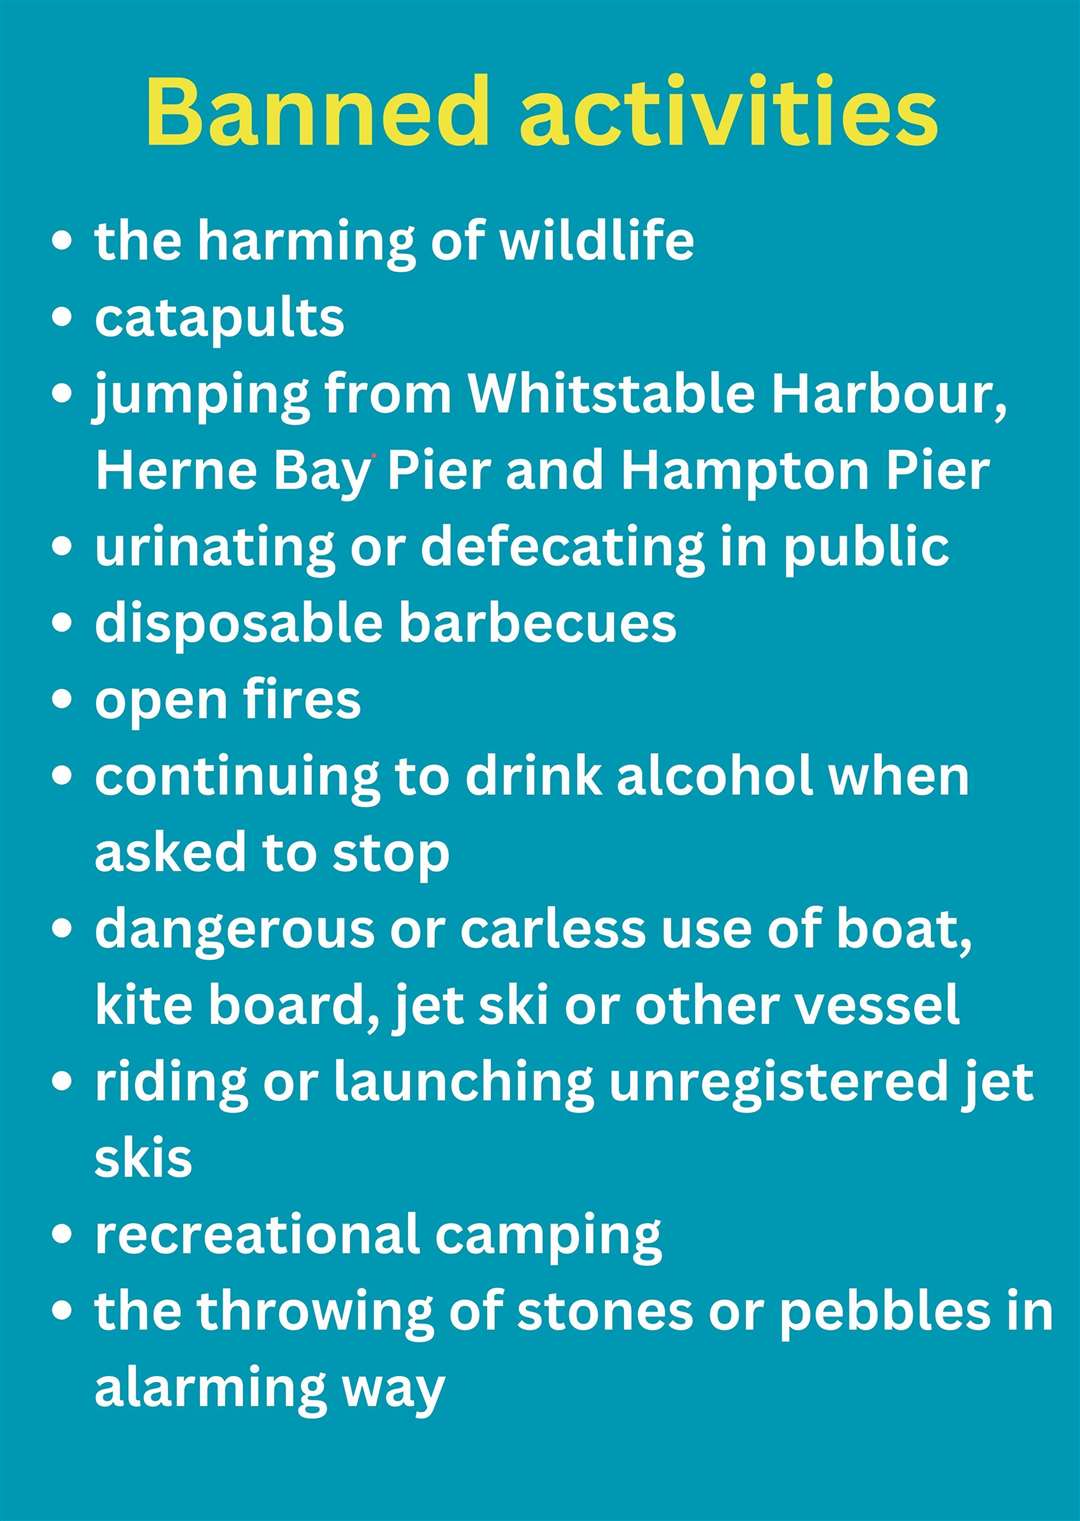 The activities banned under the new coastal PSPO, which comes into effect on April 1